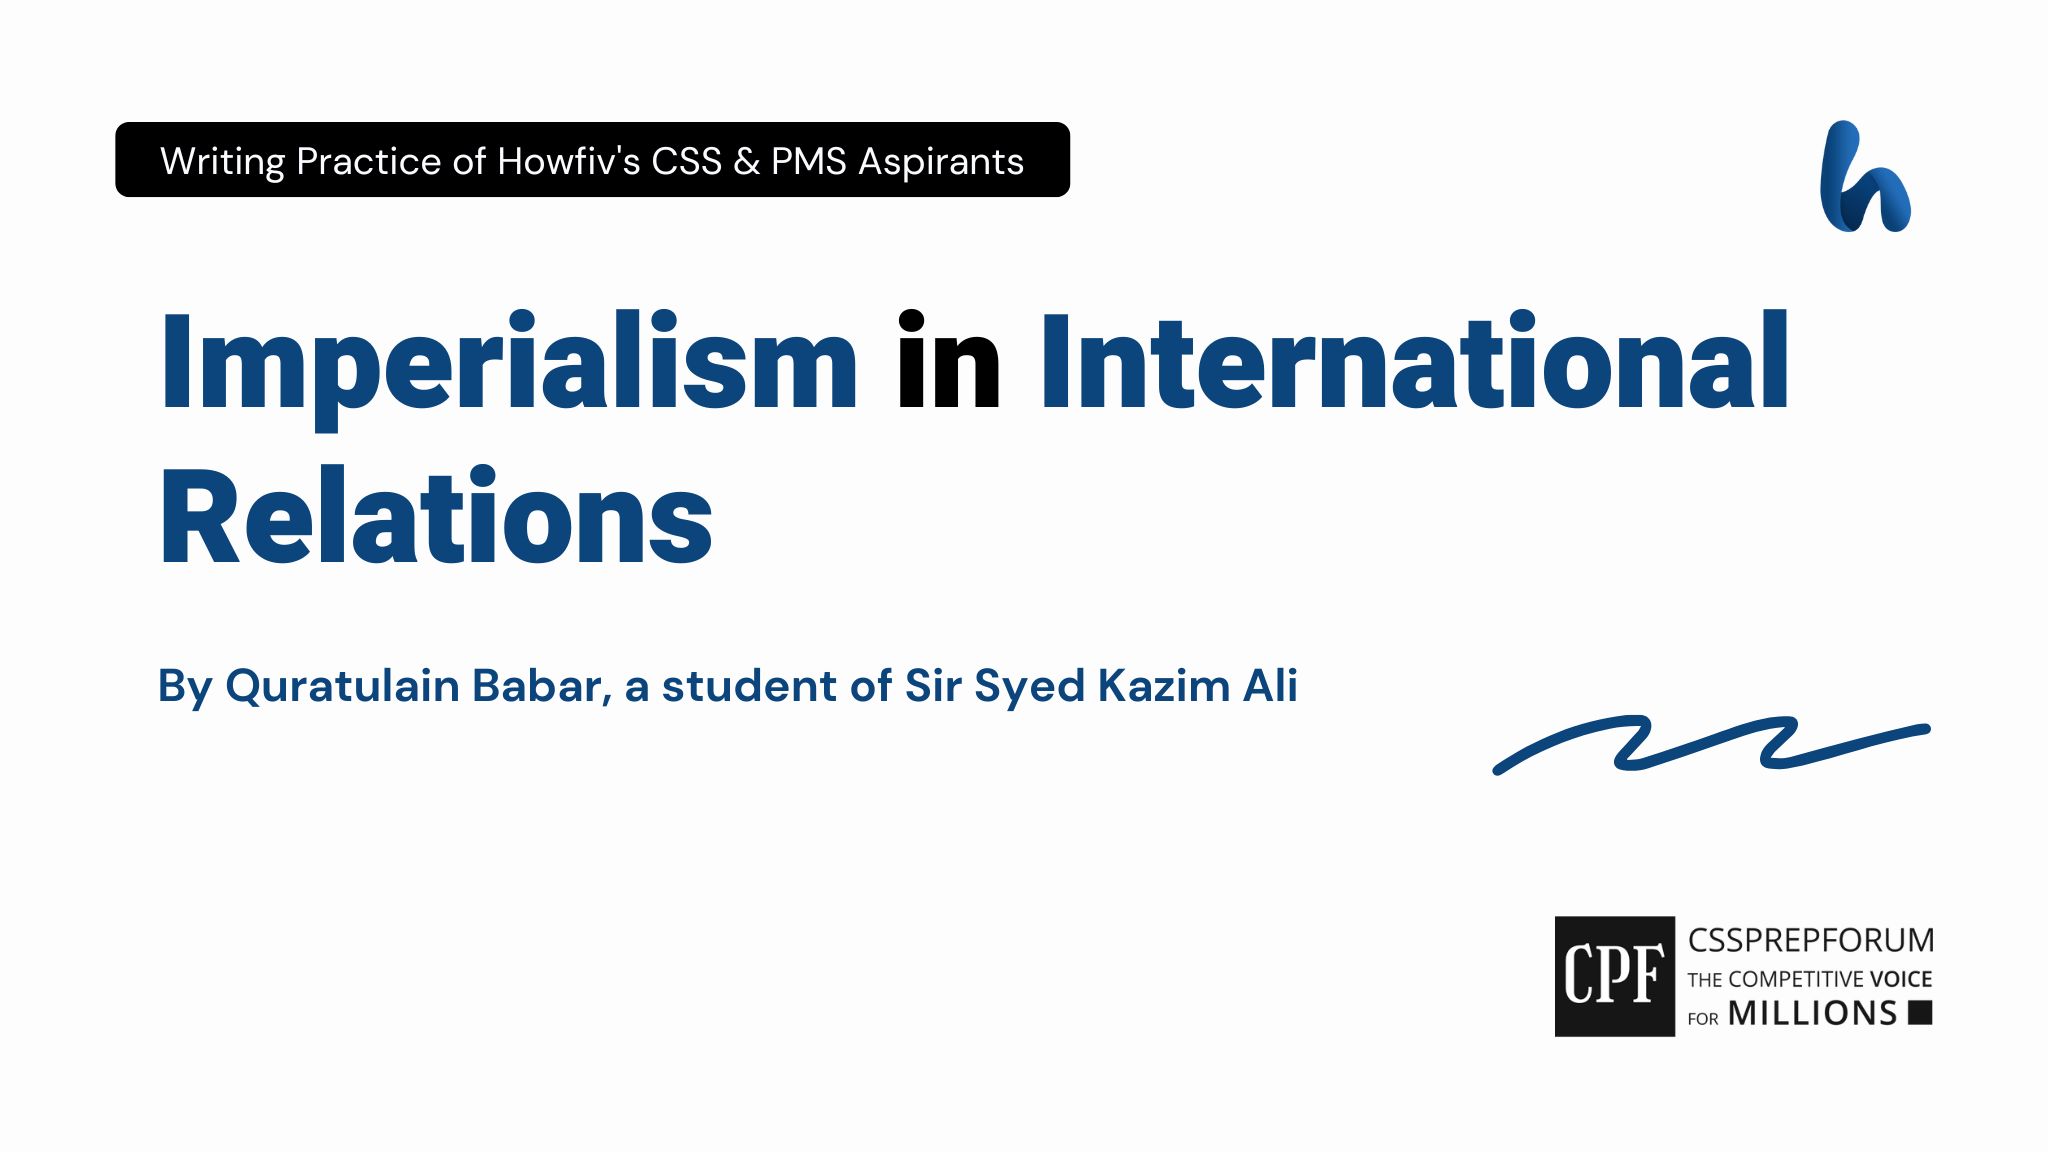 Imperialism in International Relations by Quratulain Babar